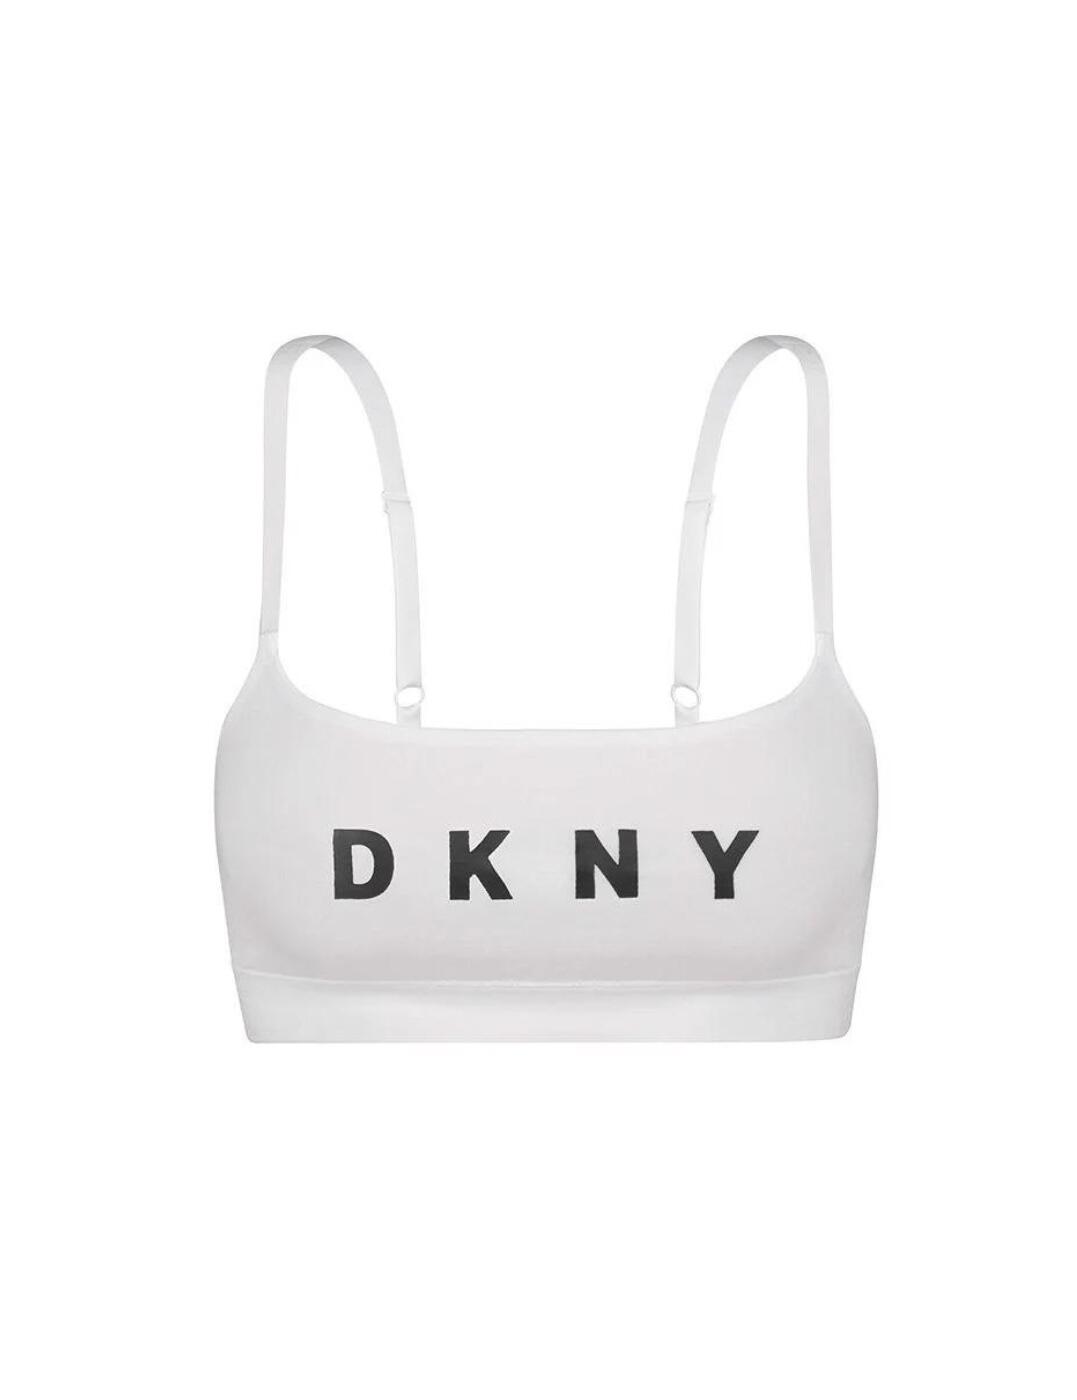 DKNY seamless two pack bralettes in white and black